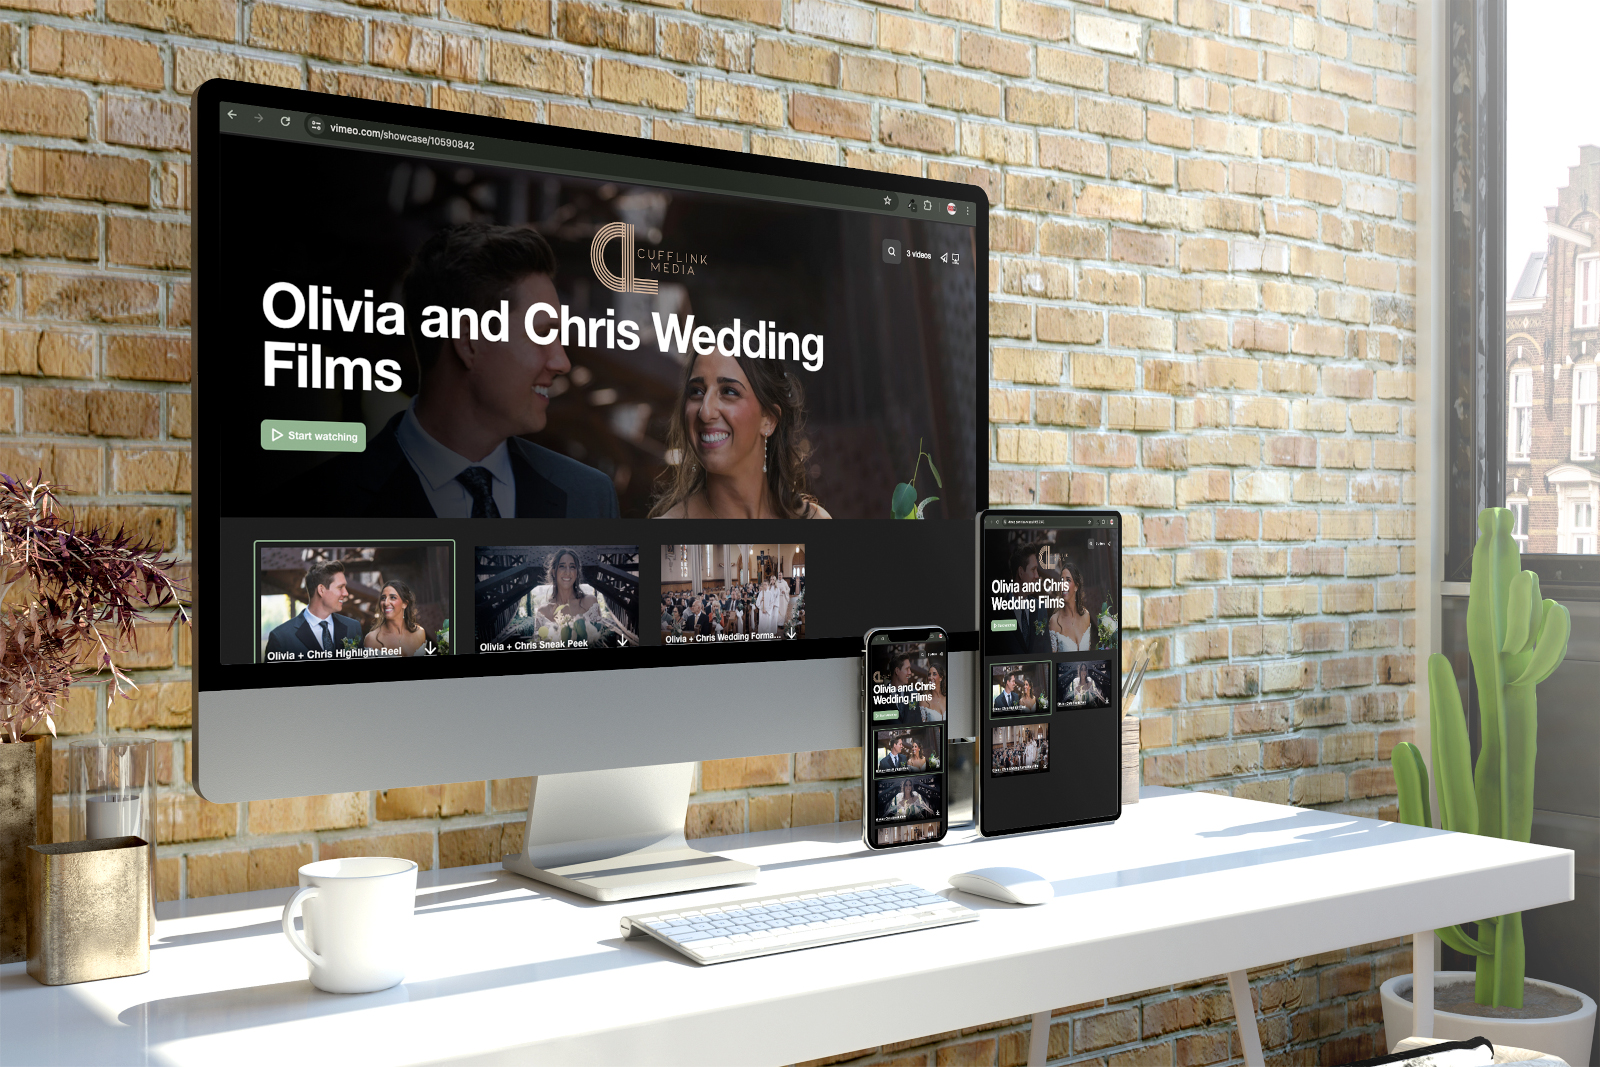 Wedding Video Sharing Made Simple With Cuff Link Media